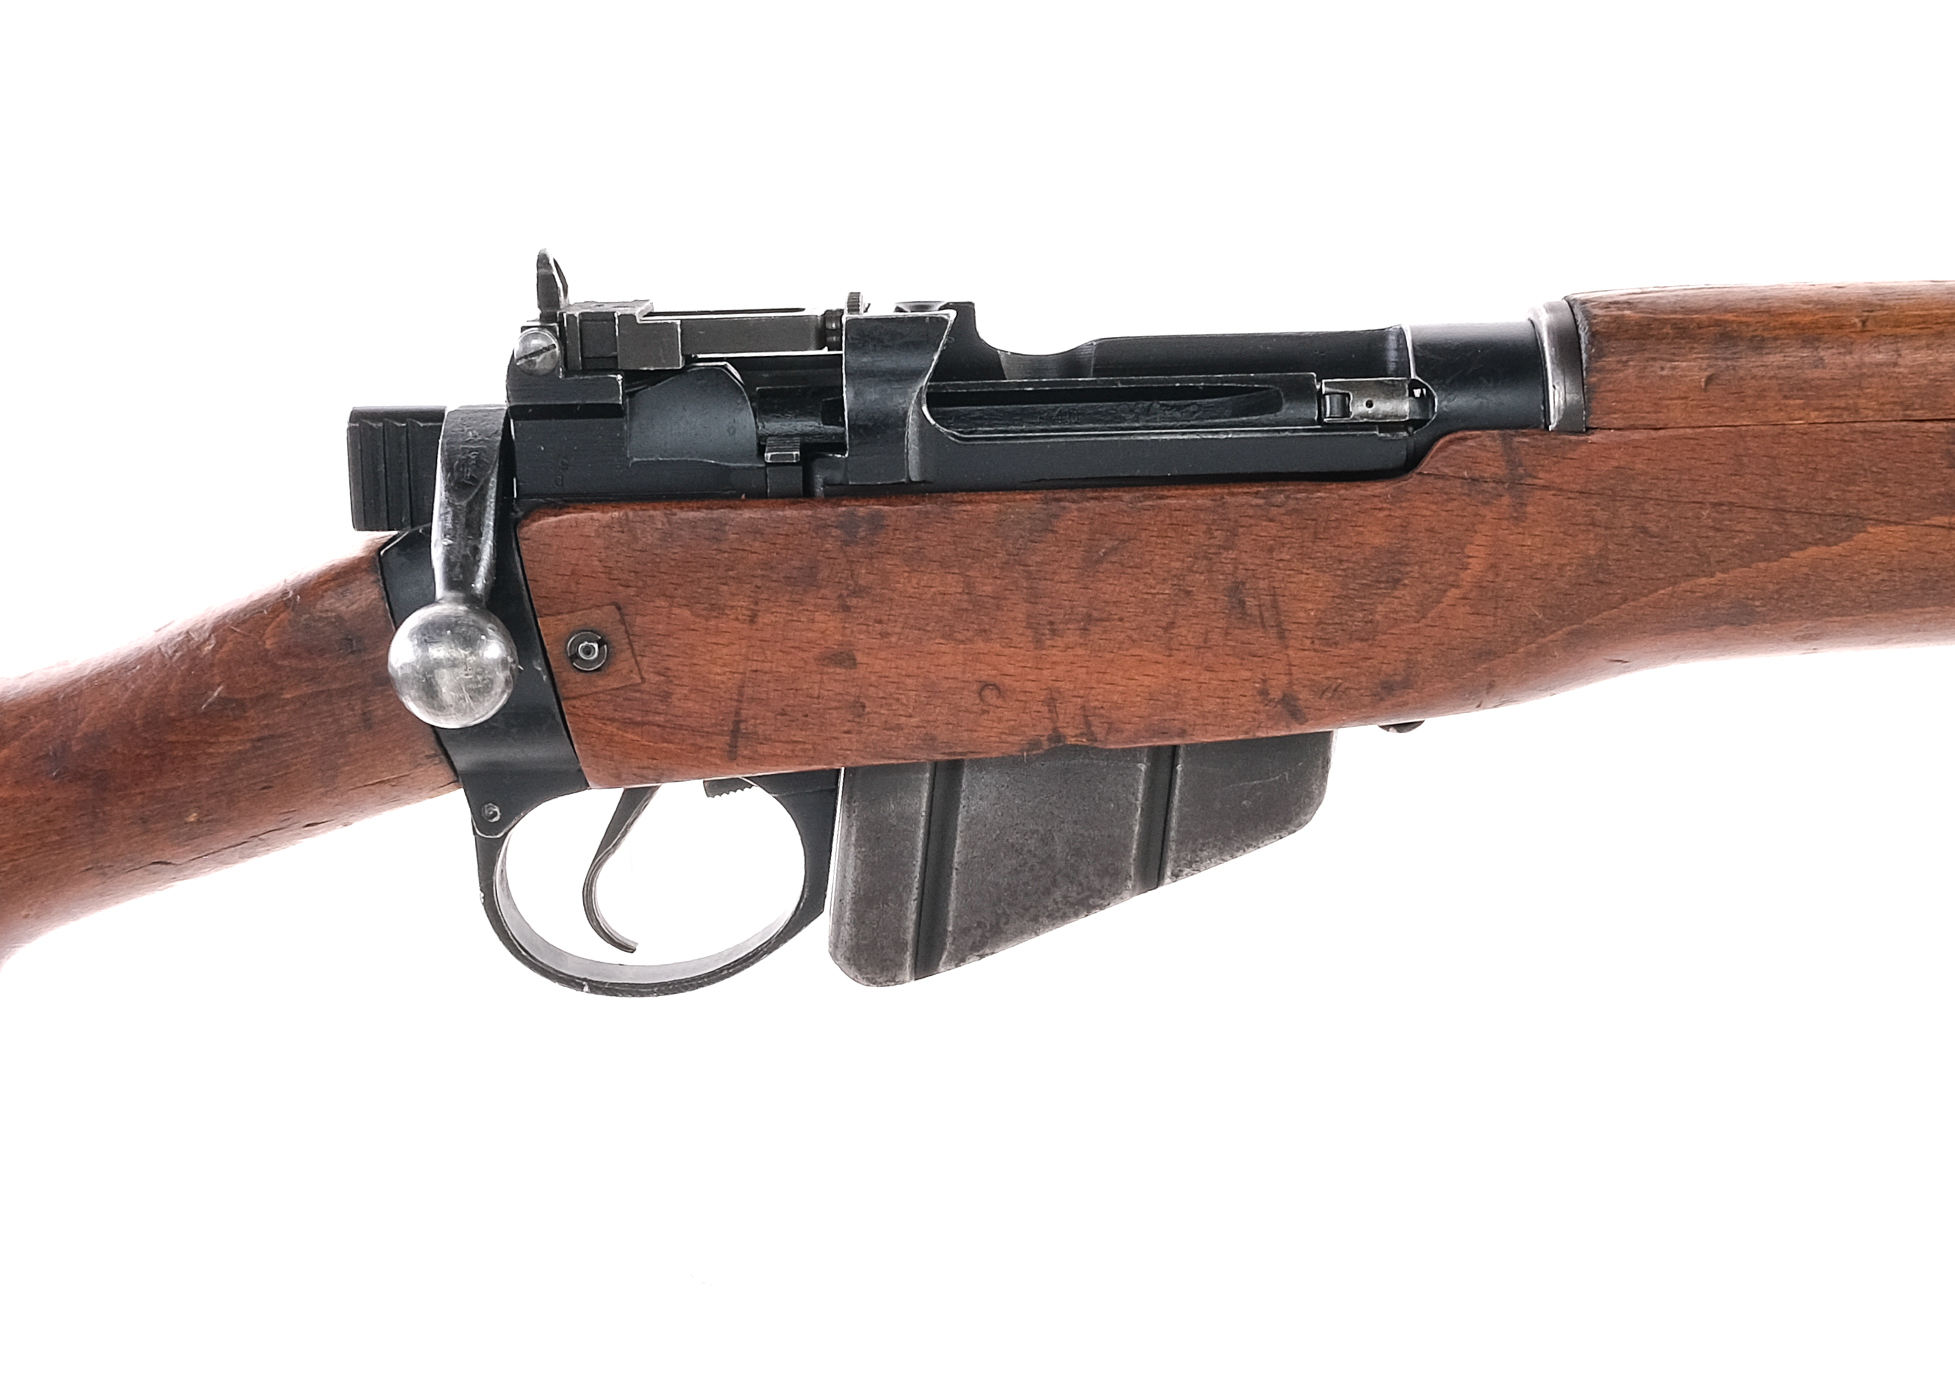 Sold at Auction: Lee Enfield No. 4 Mk I Bolt Action Rifle